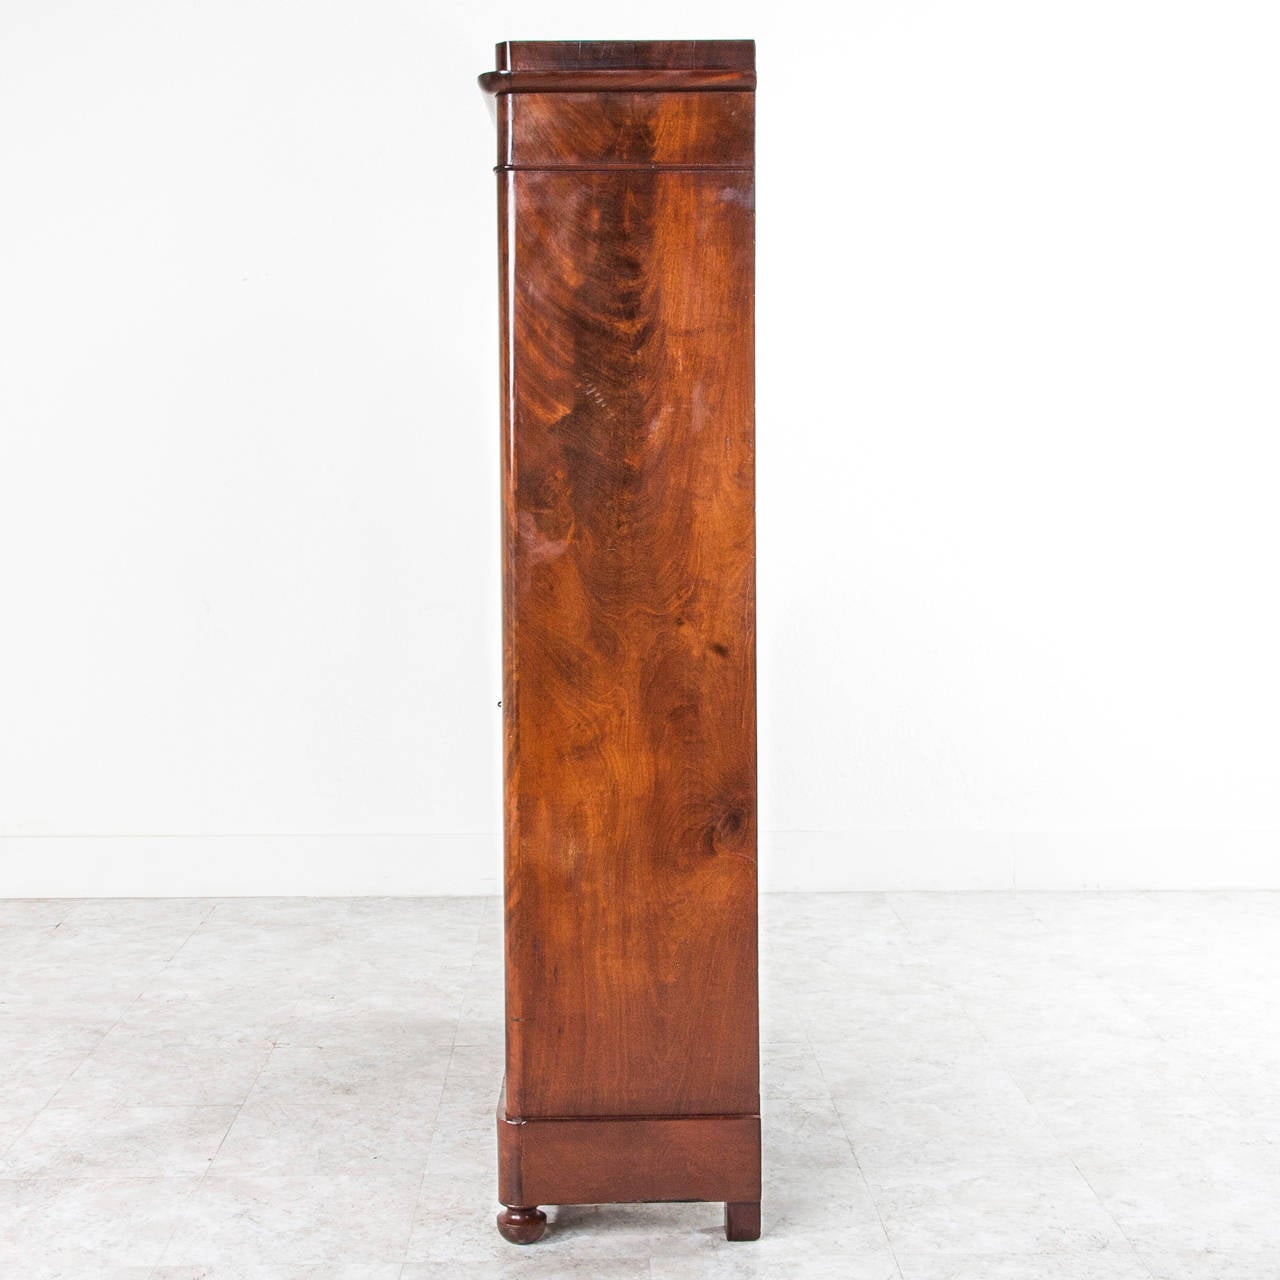 This period Louis Philippe bibliotheque is finished in French polished flamed mahogany. The classic simple Louis Philippe lines allow the beauty of the wood to speak for this piece, while the original hand blown glass doors will give anything